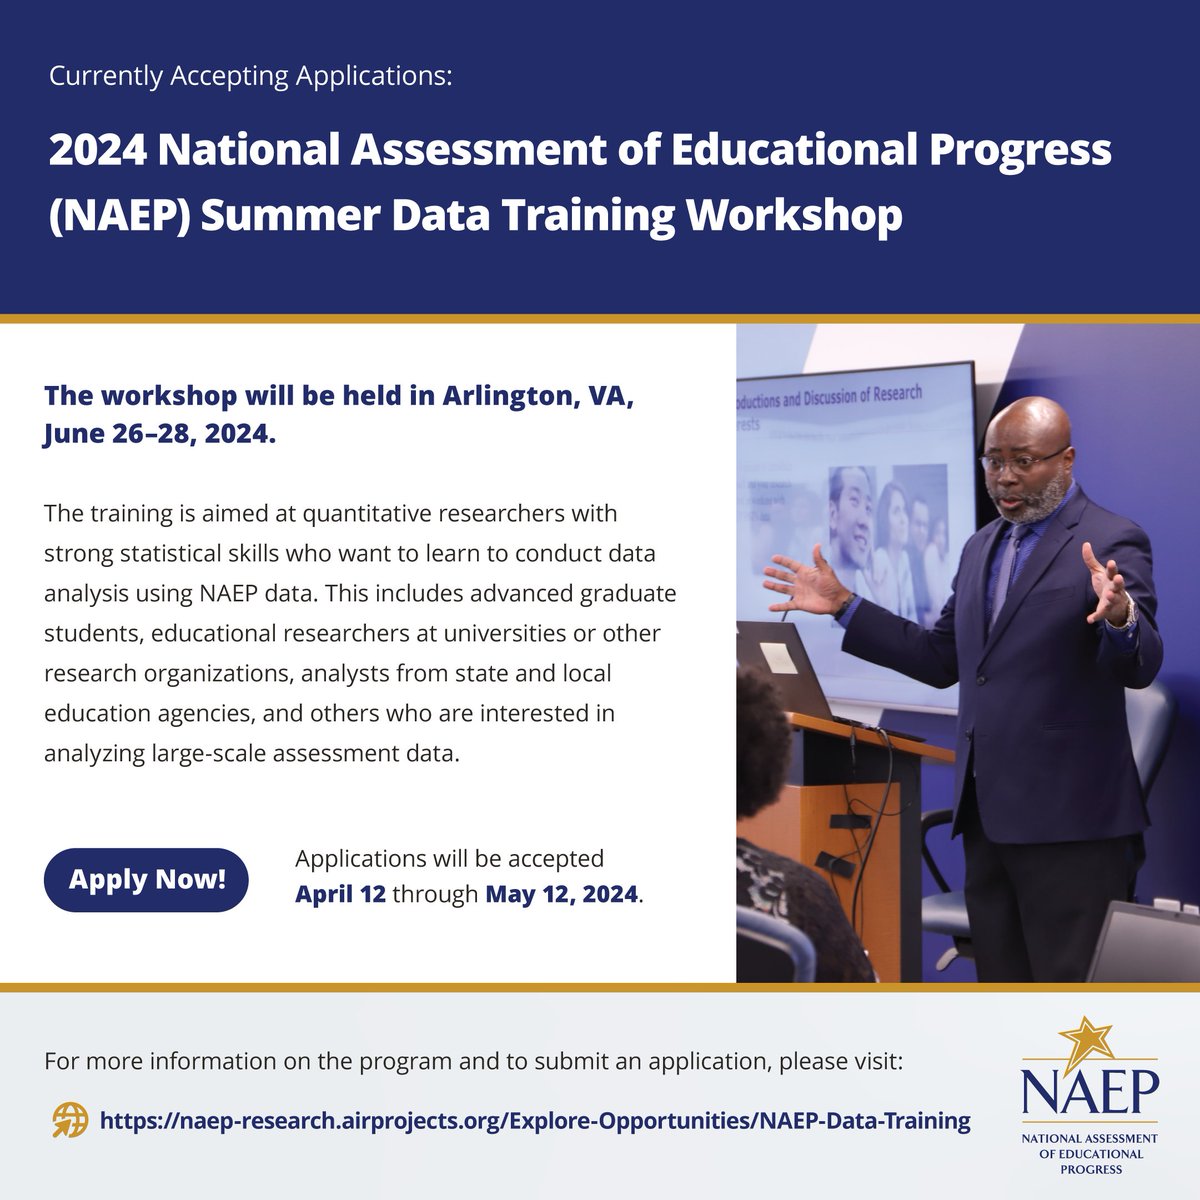 ICYMI: @NAEP_NCES is currently accepting applications for the NAEP Data Training Workshop, being held June 26-28 in Arlington, VA. Get an intro to #COVID data collections & conduct data analysis using #EdStats from the Nation’s Report Card! naep-research.airprojects.org/Explore-Opport… #EdResearch